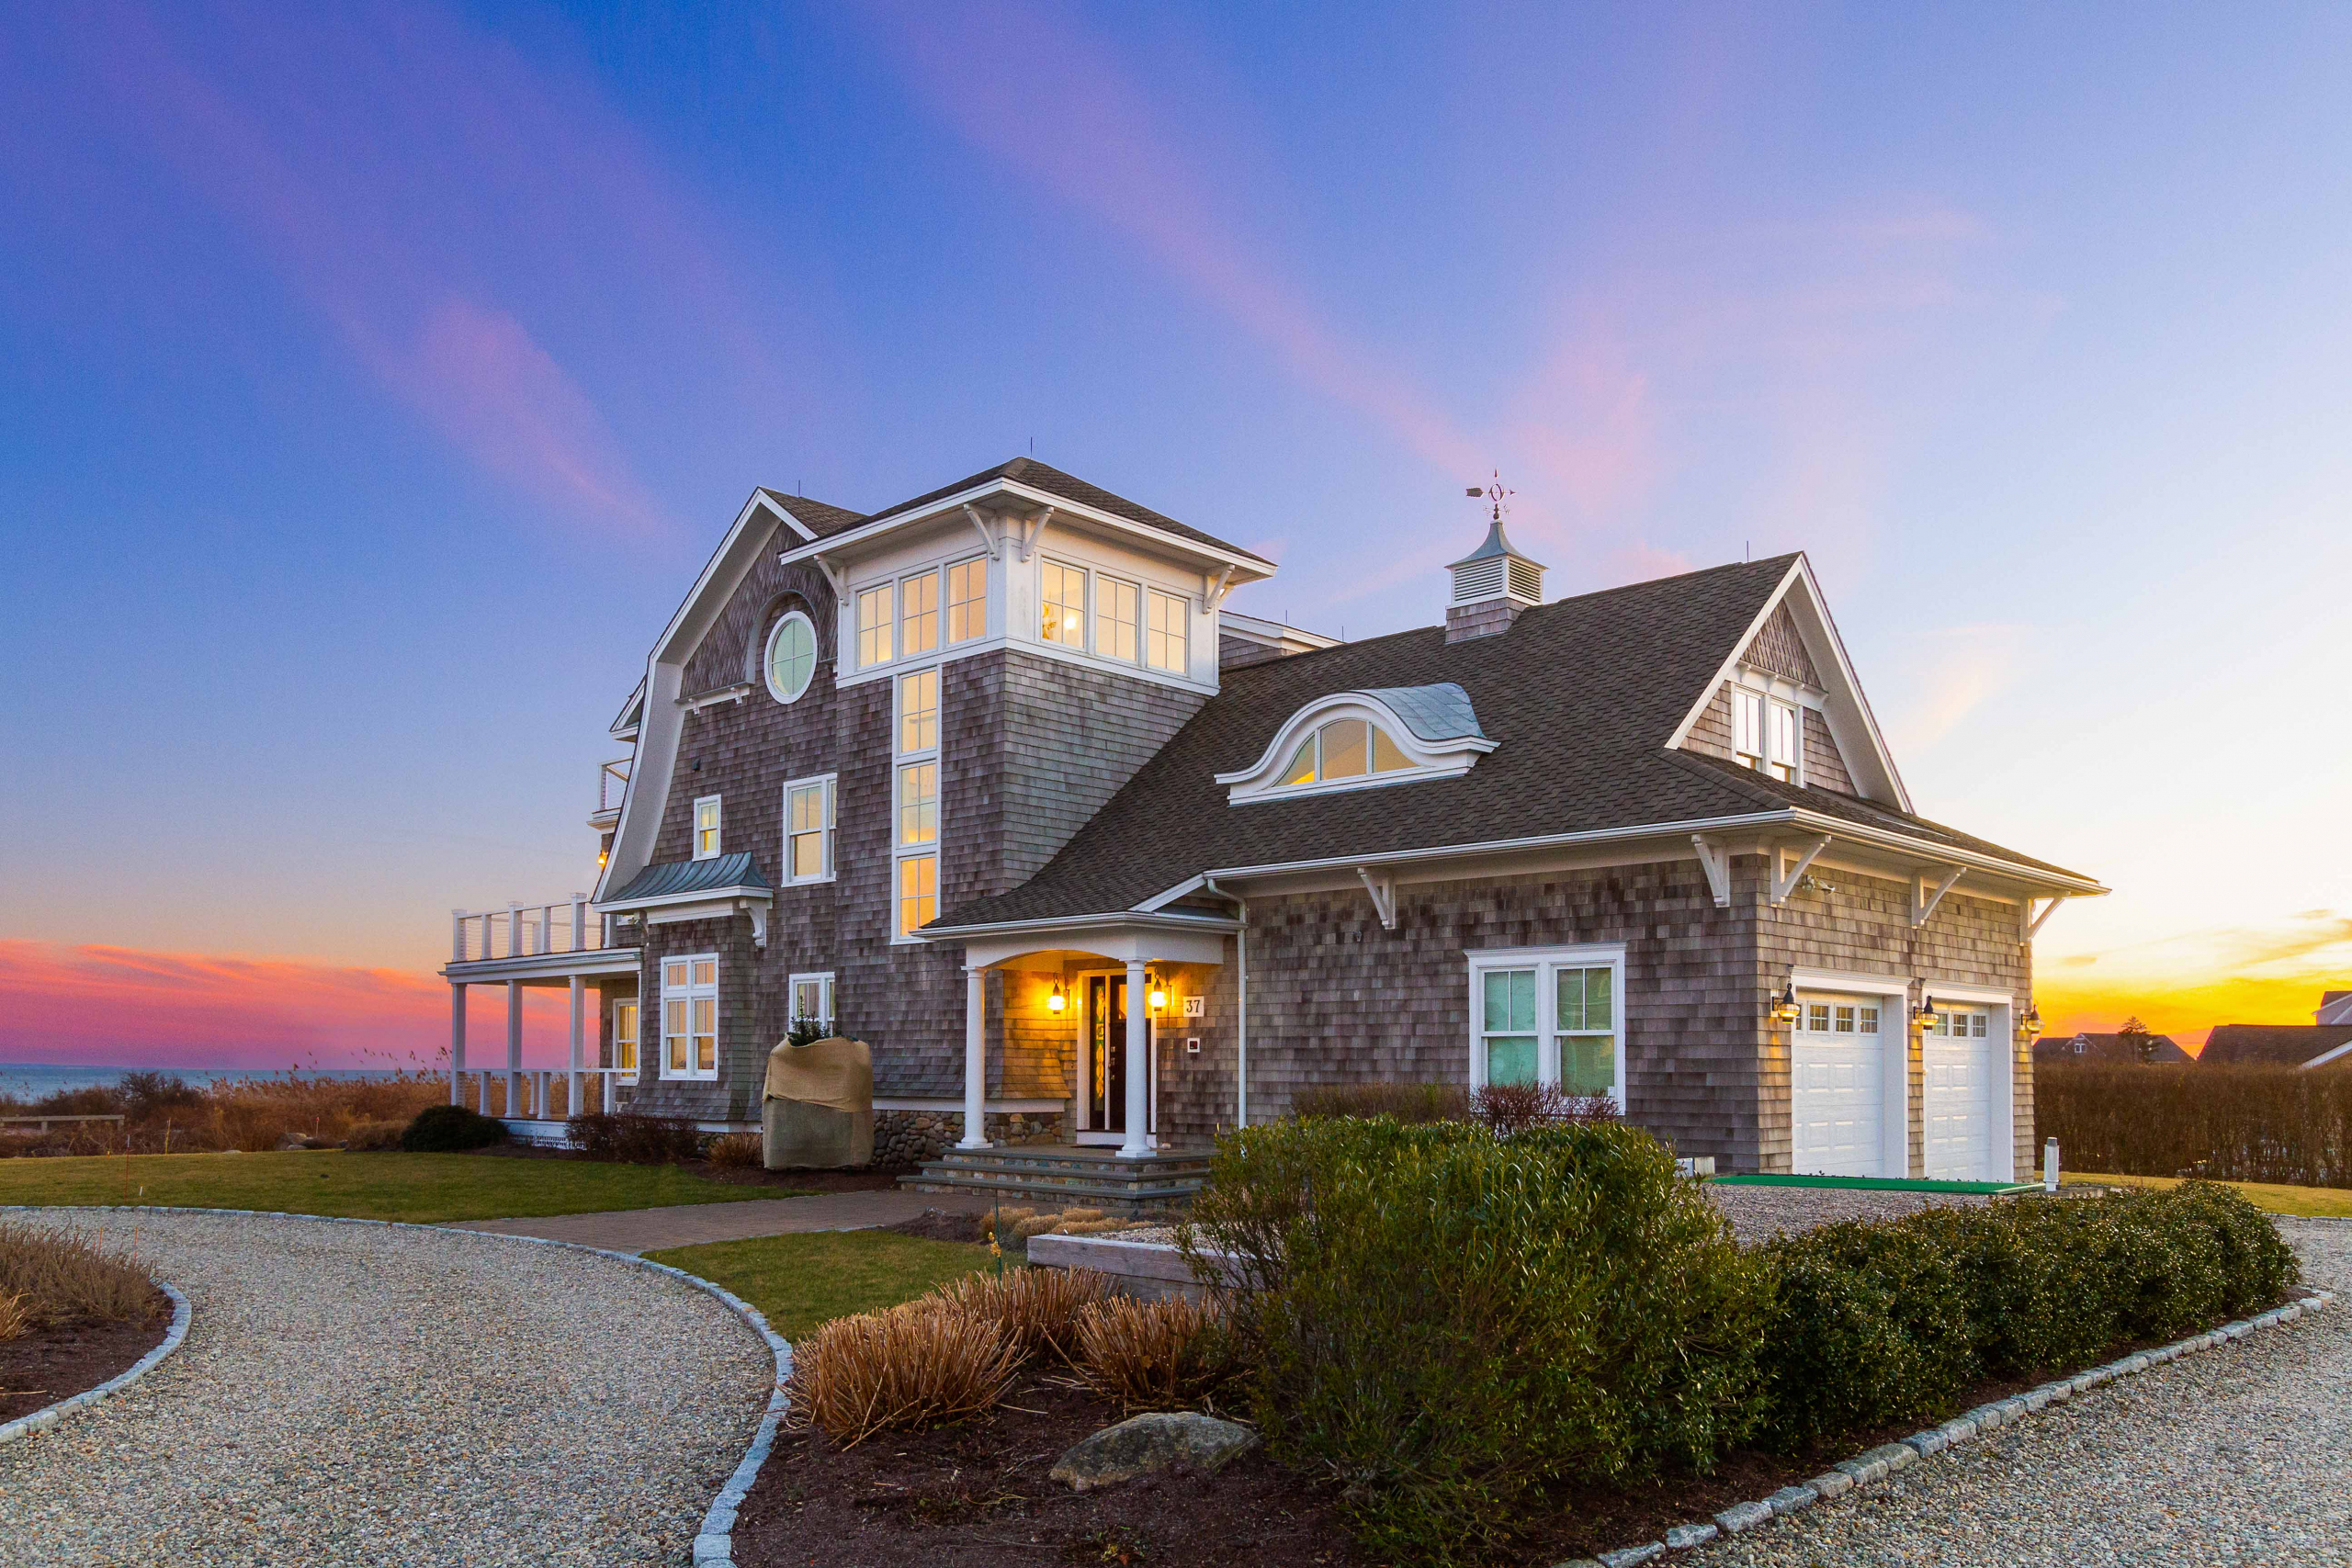 GREEN HILL BEACH HOME SELLS FOR $2,575,000, MARKING HIGHEST SALE IN SOUTH KINGSTOWN SINCE MARCH 2017*